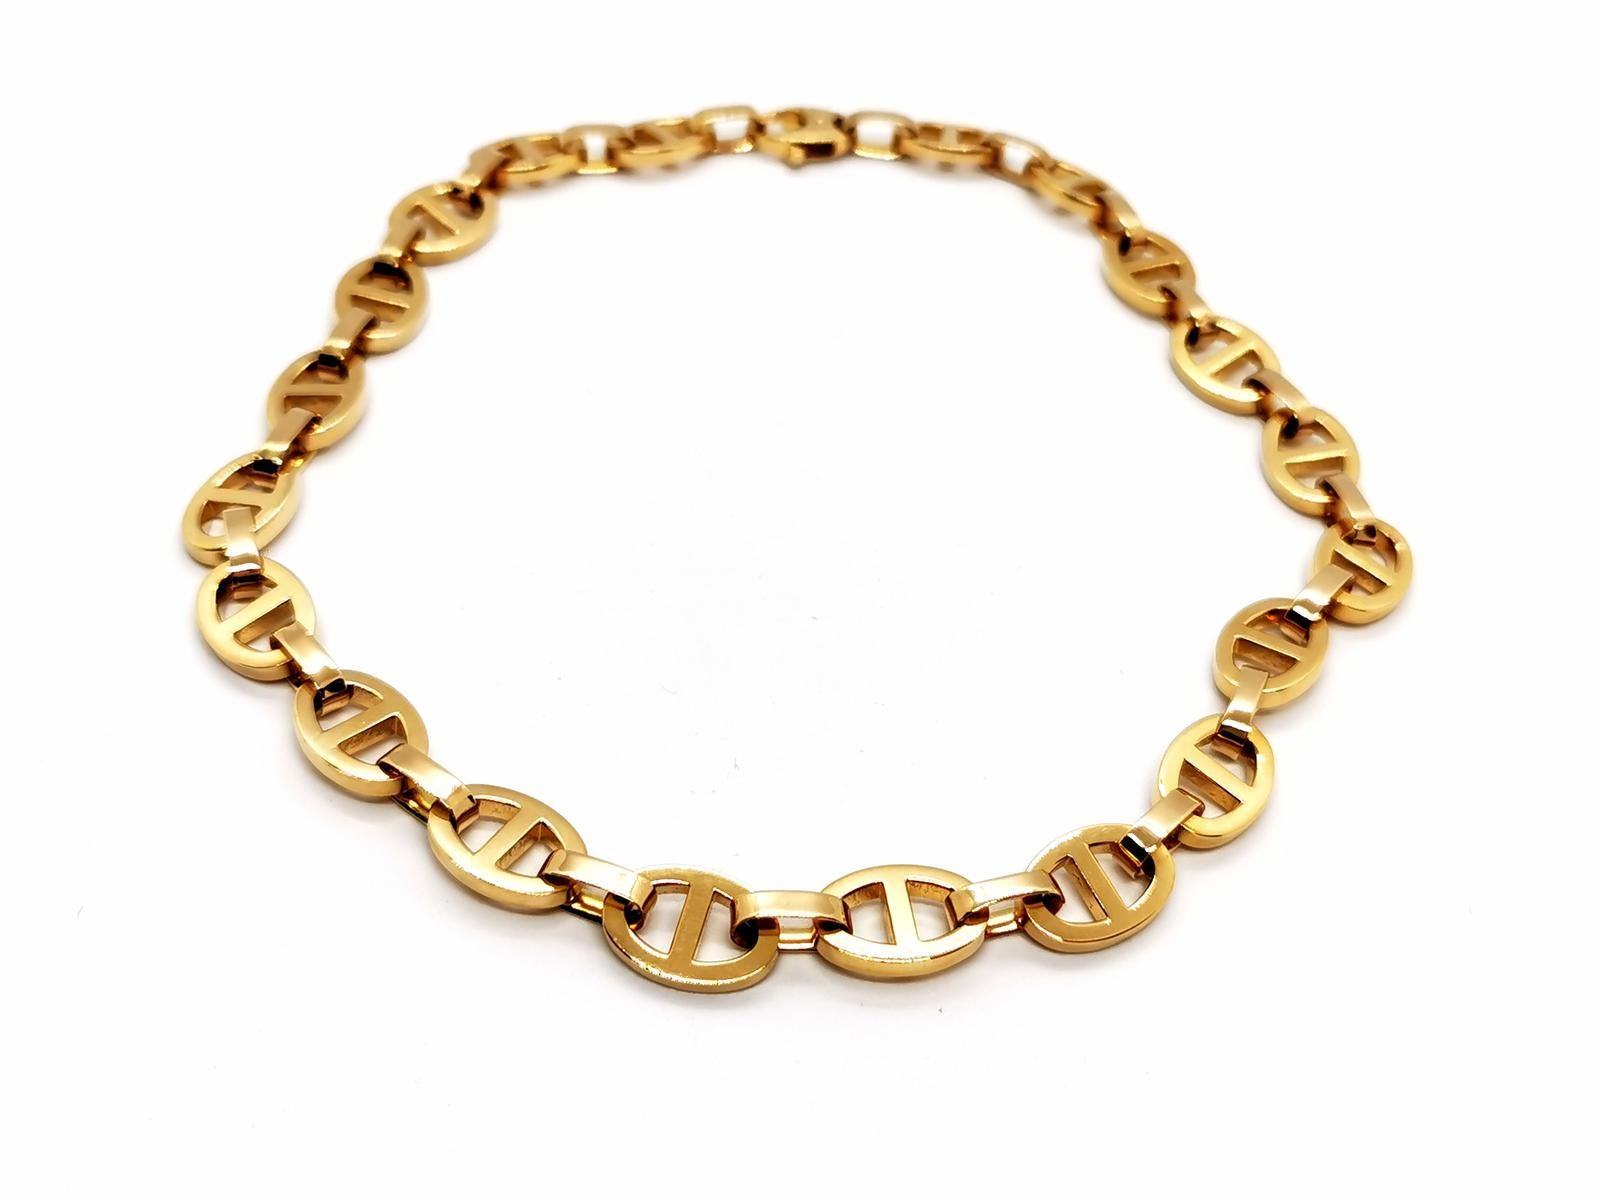 Gold necklace yellow 750 mils (18 carats). massive marine mesh. length: 43 cm. width: 1.13 cm. thickness: 0.26 cm. total weight: 92.38 g. punched. excellent condition
